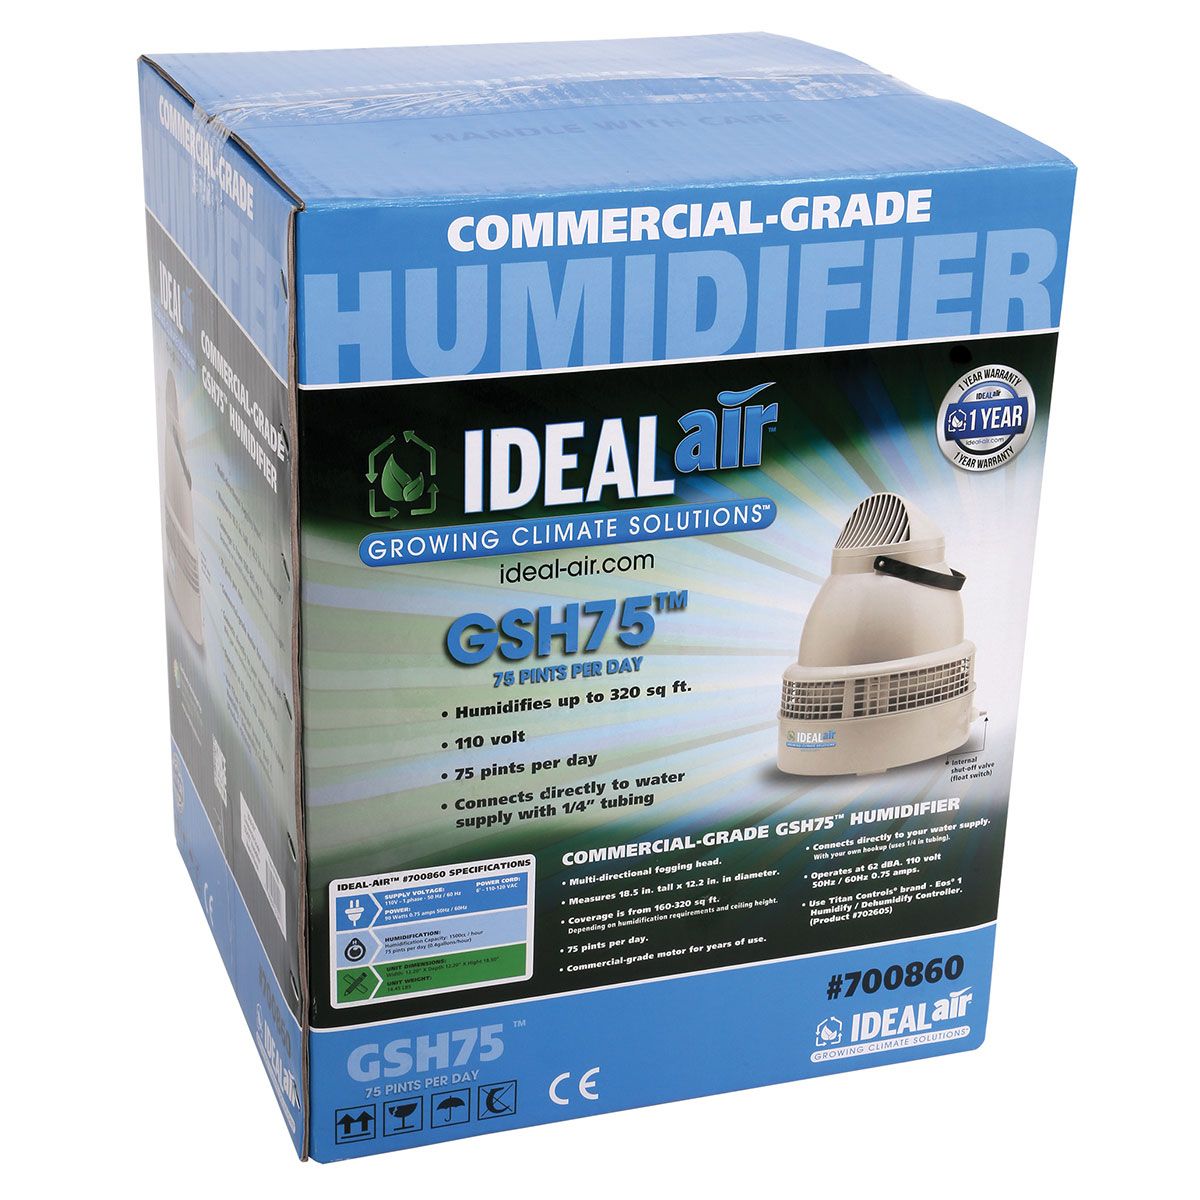 Ideal-Air Commercial Grade Humidifier 75 Pint